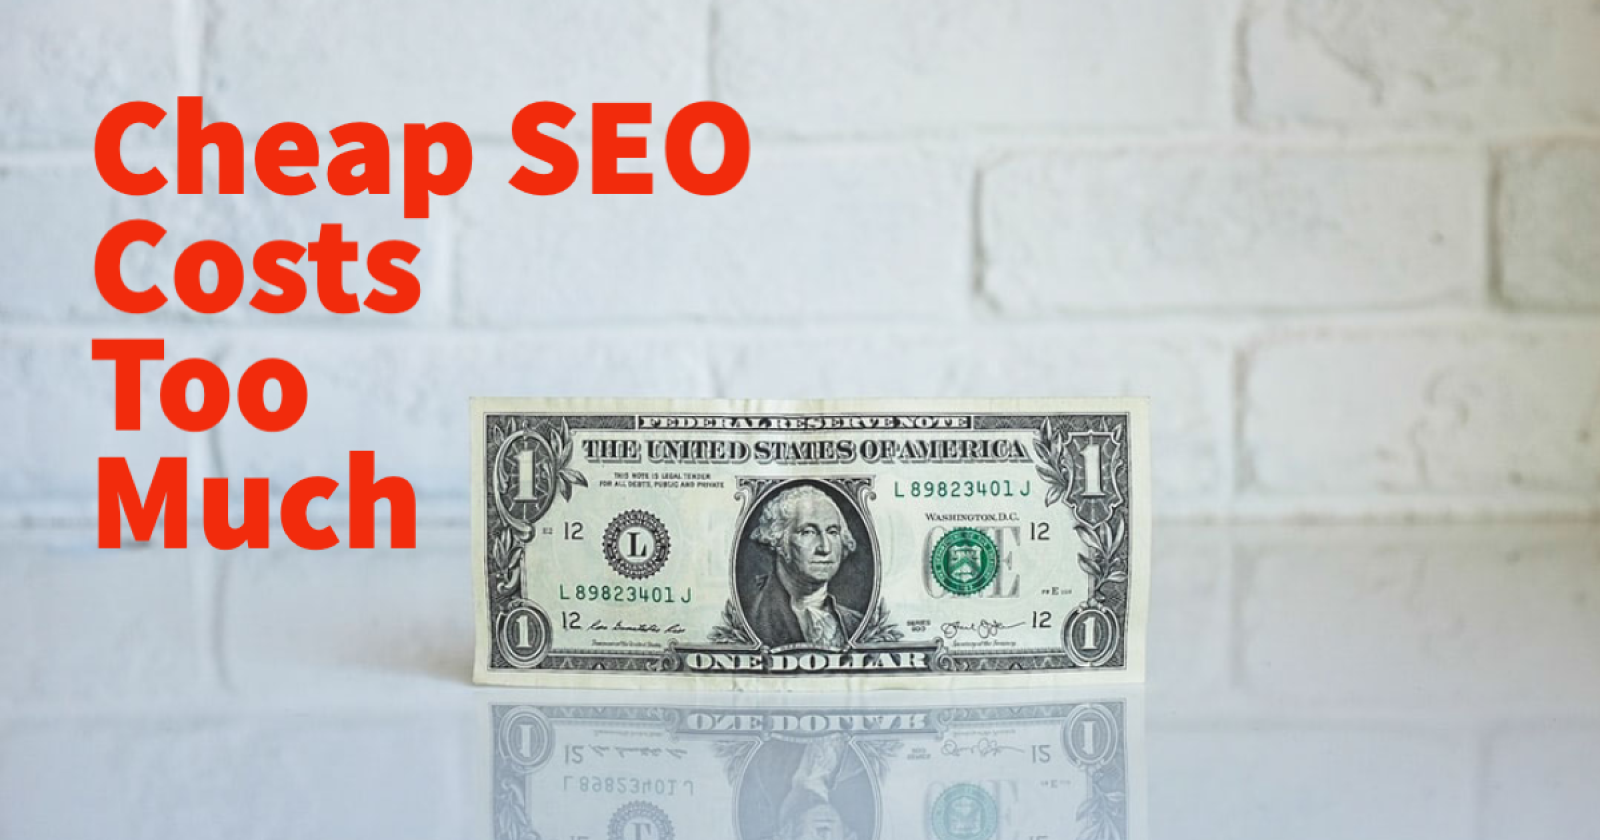 Cheap SEO Costs Too Much